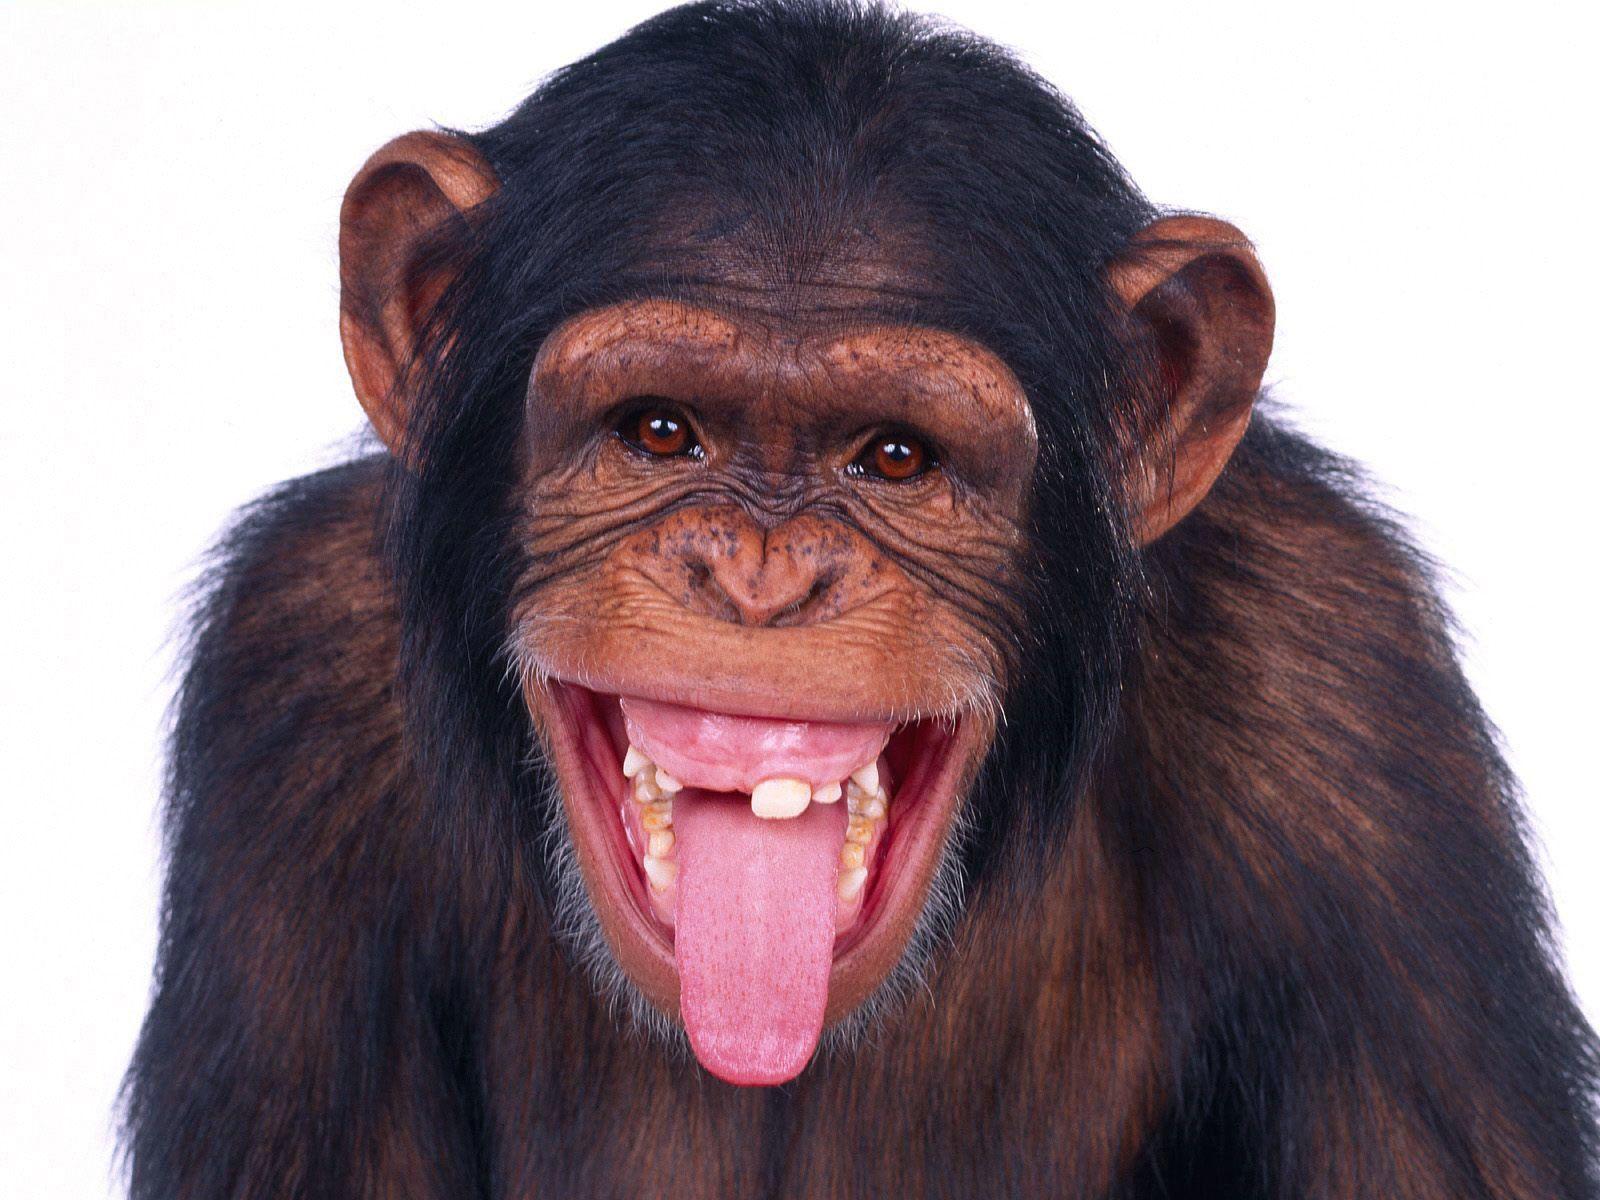 Chimpanzees Wallpaper Cute and Docile